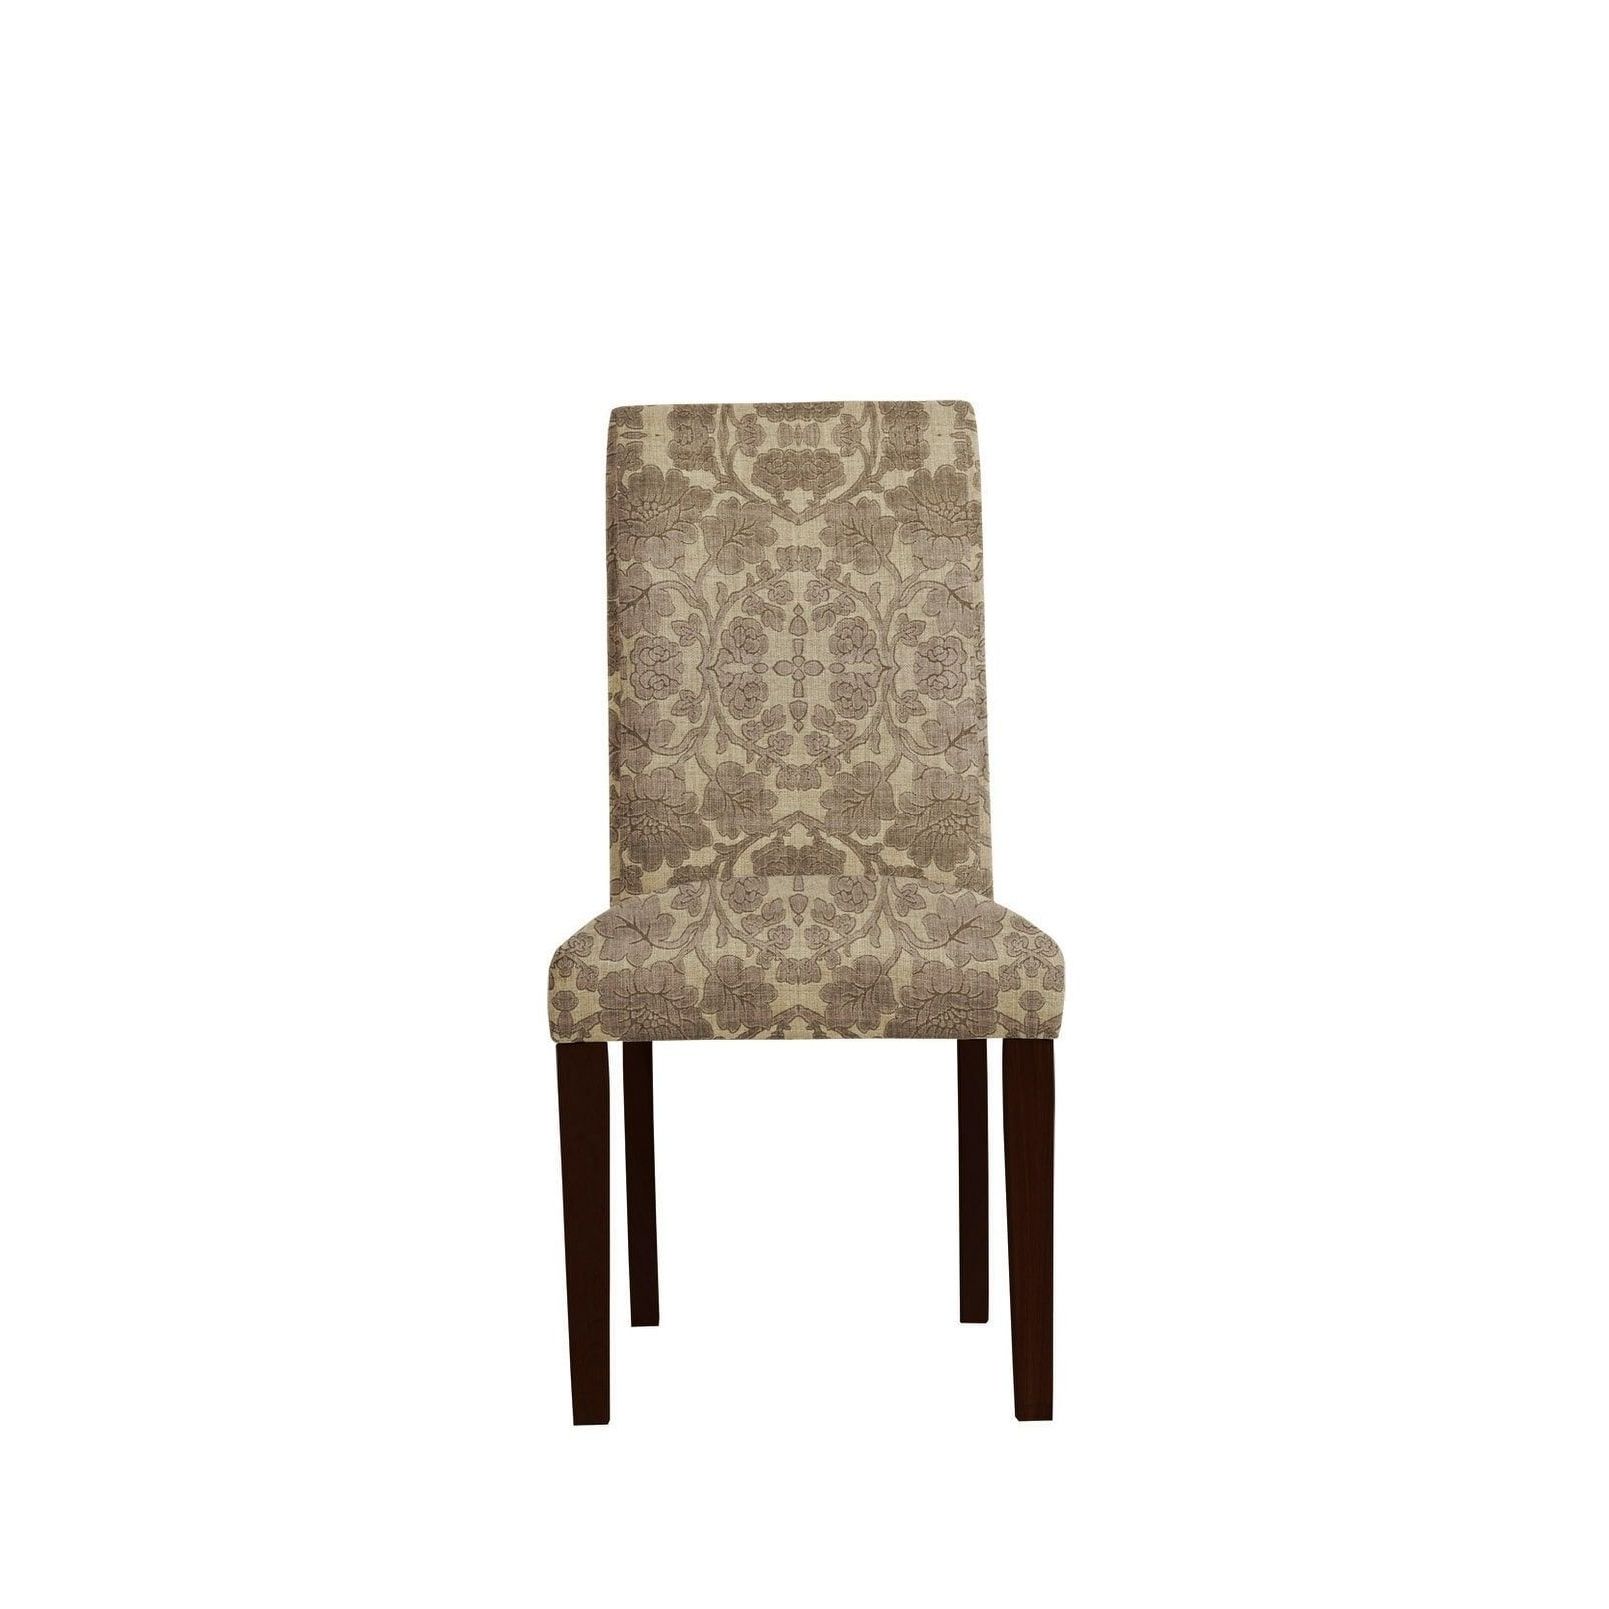 Trendy Set Of 2 Daniala Side Chairs With Plush Fabric 648, Brown/floral Intended For Caira Upholstered Side Chairs (View 11 of 20)